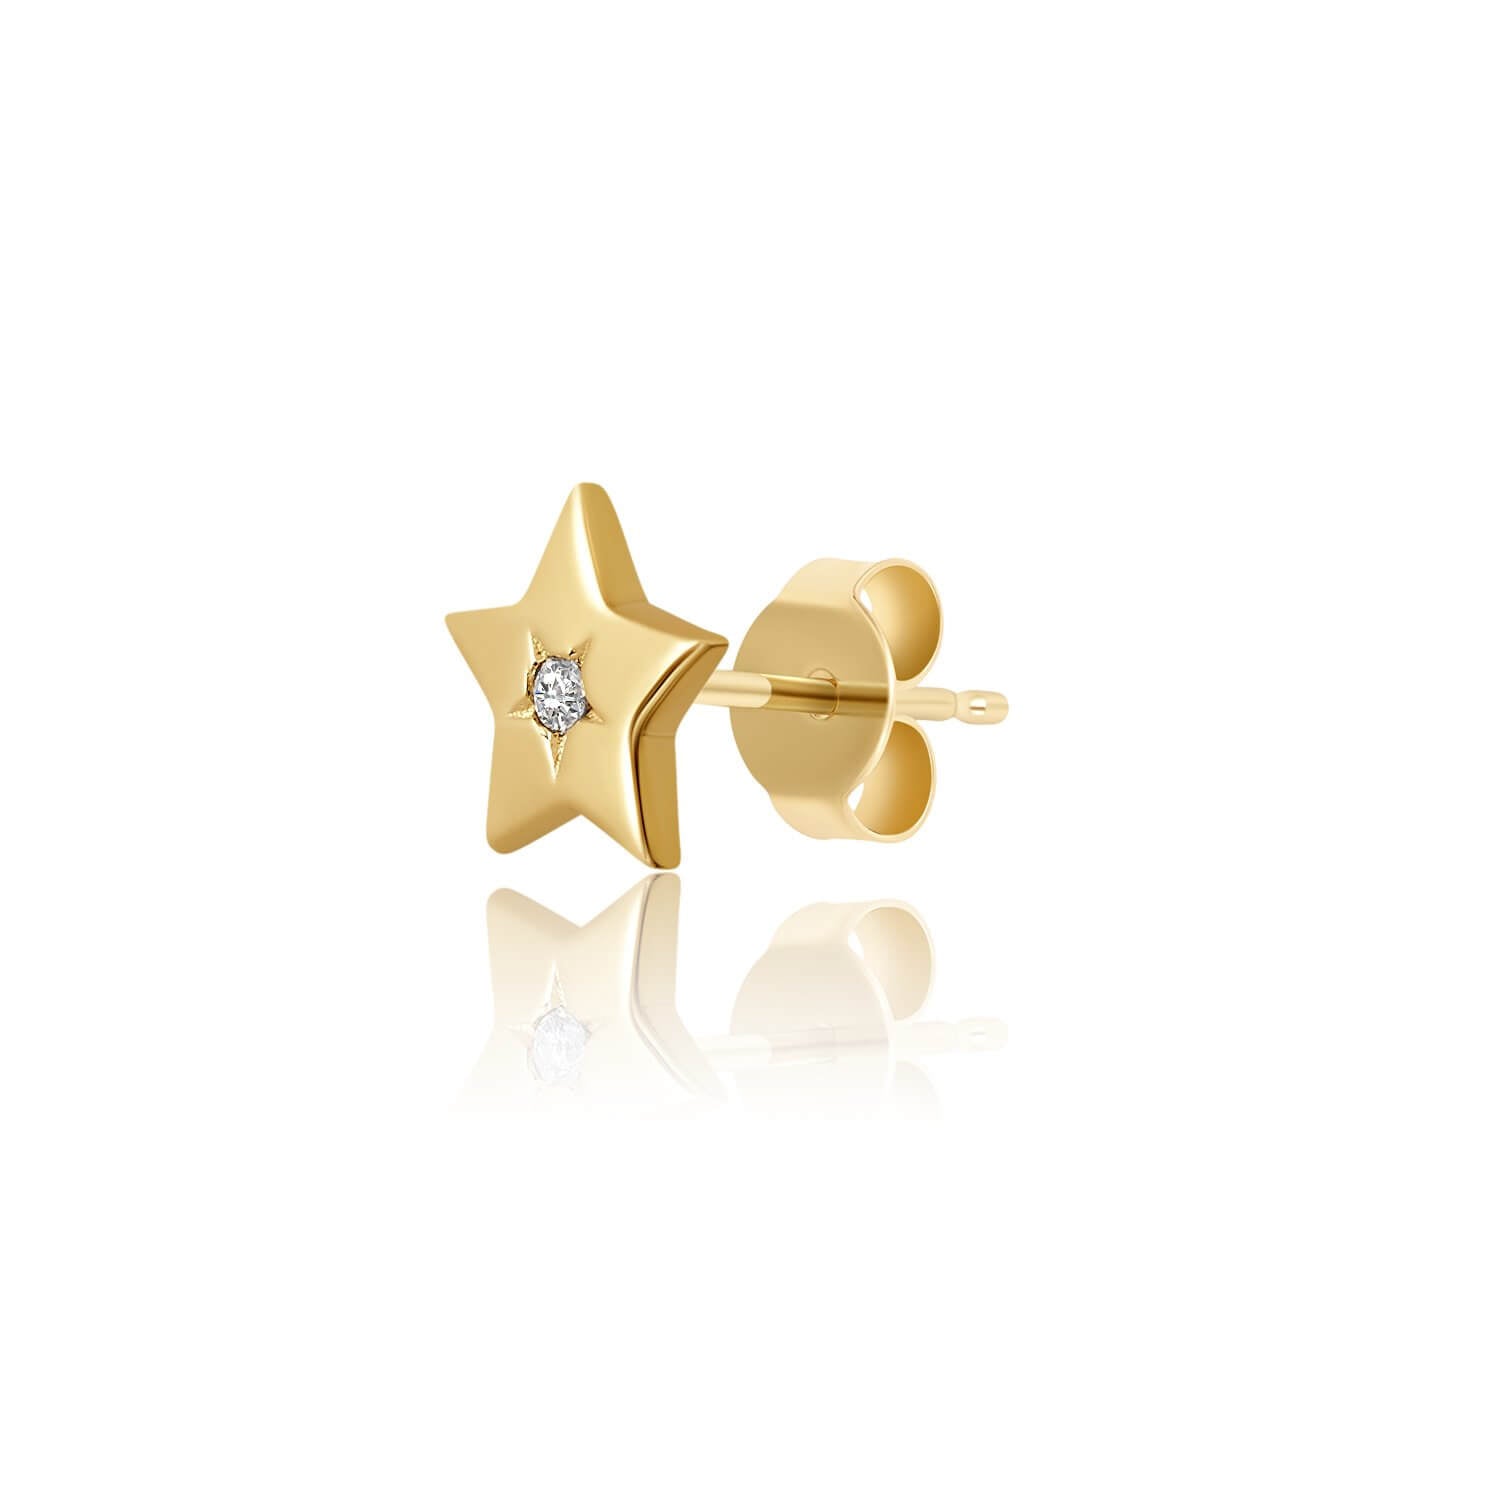 14k yellow gold star earring with diamond